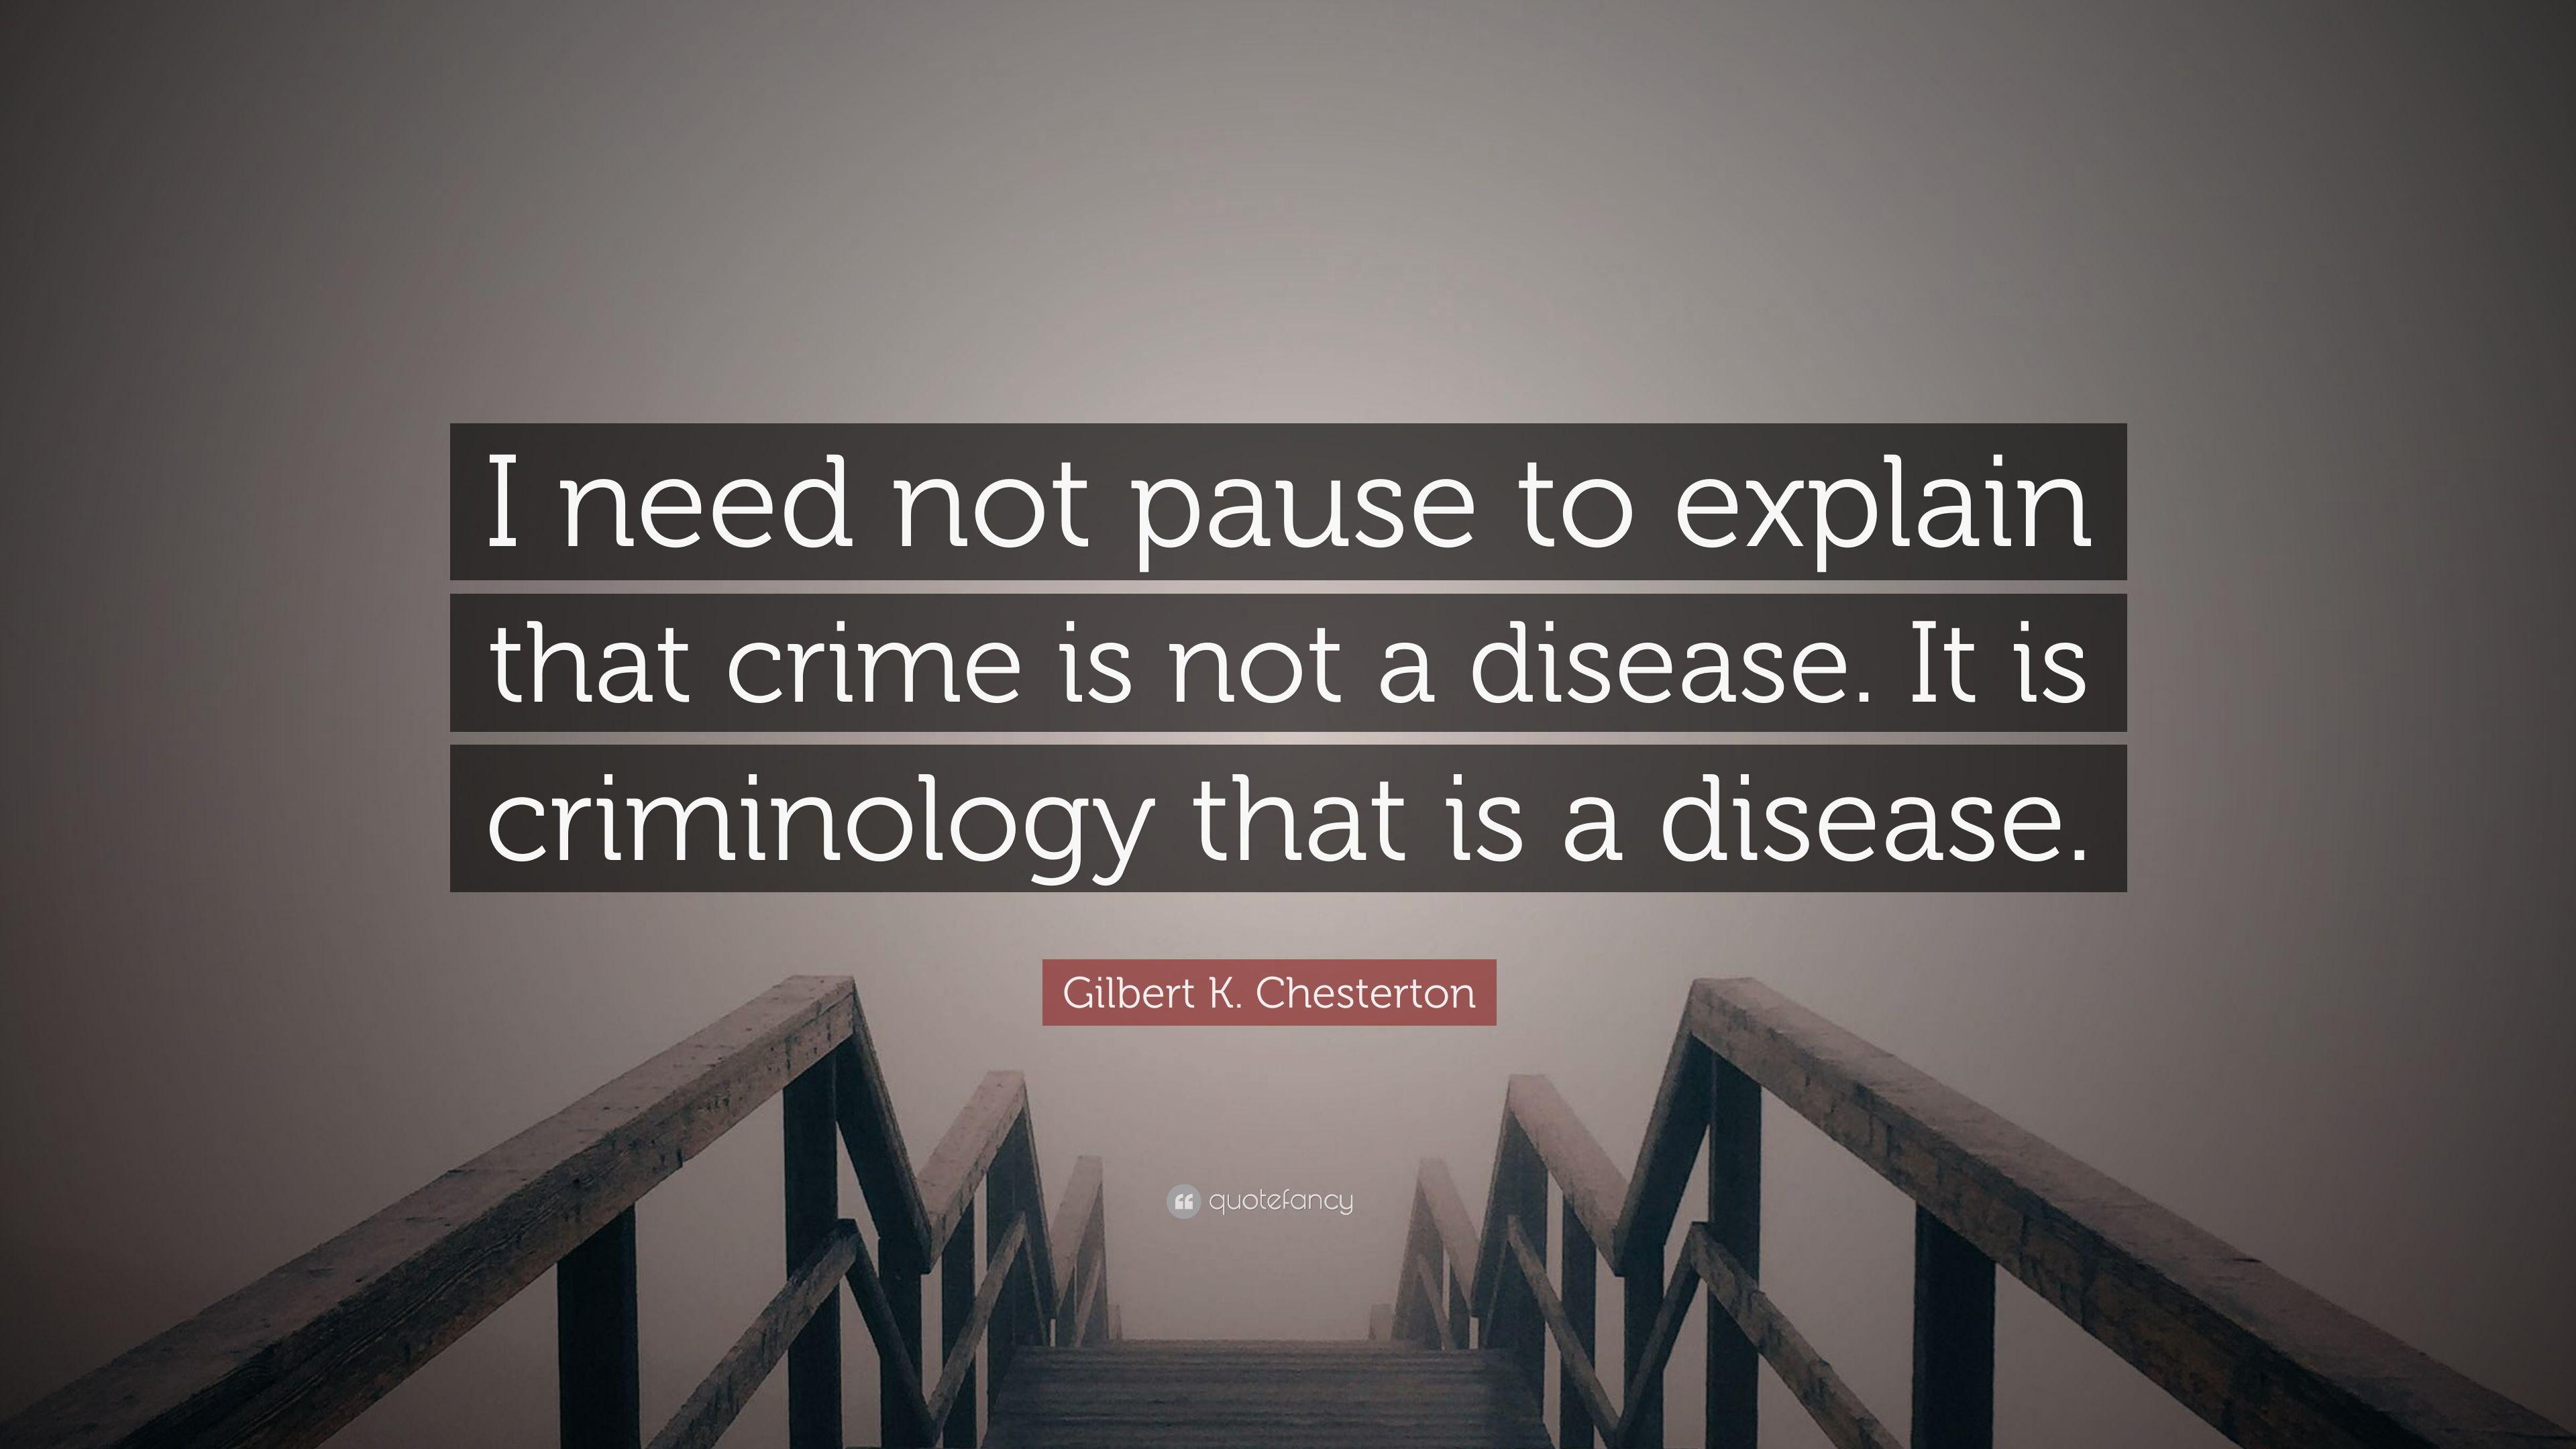 Gilbert K. Chesterton Quote: “I need not pause to explain that crime